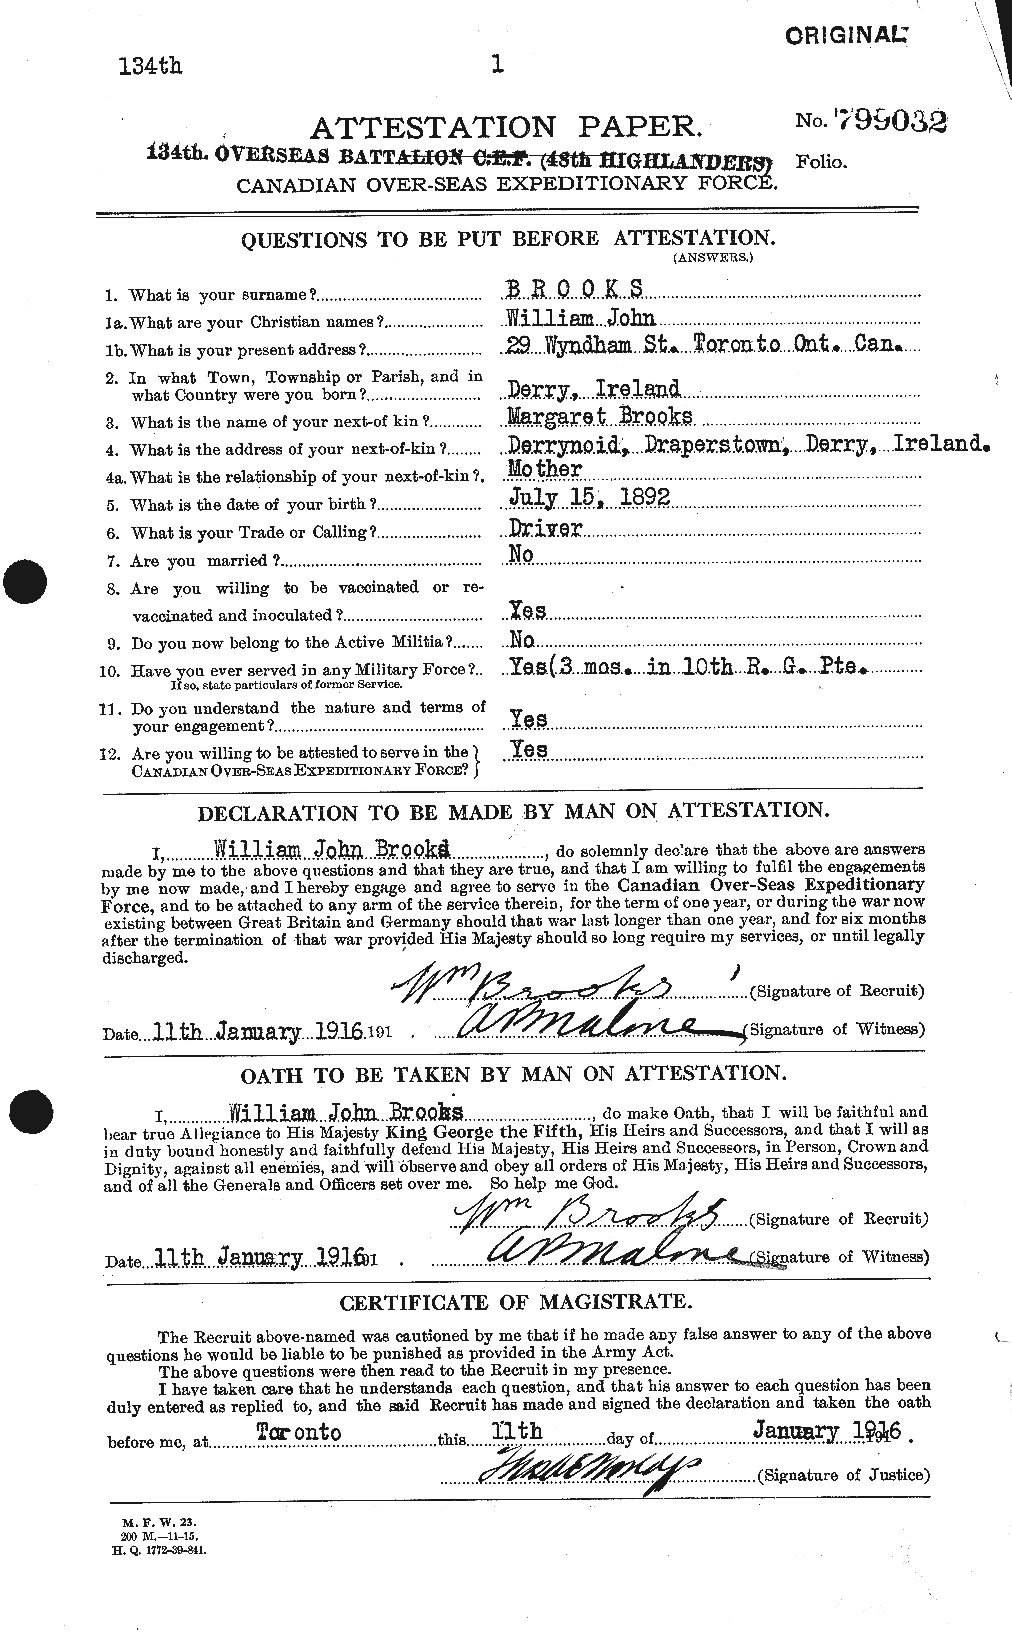 Personnel Records of the First World War - CEF 264757a